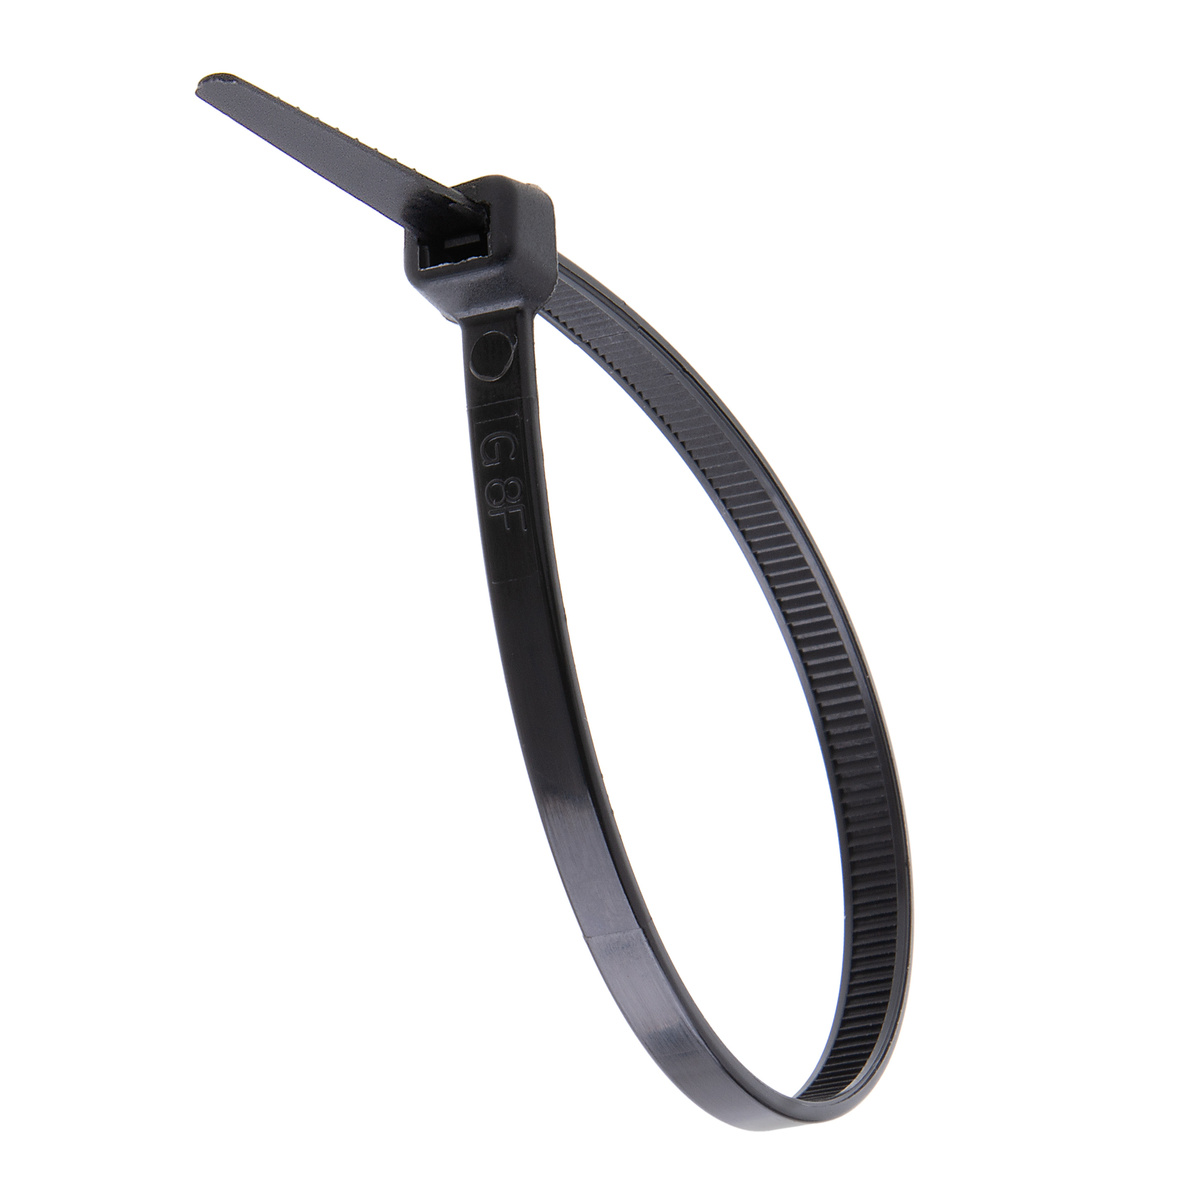 4 Inch Black Thin Cable Tie - 1000 Pack - Secure™ Cable Ties